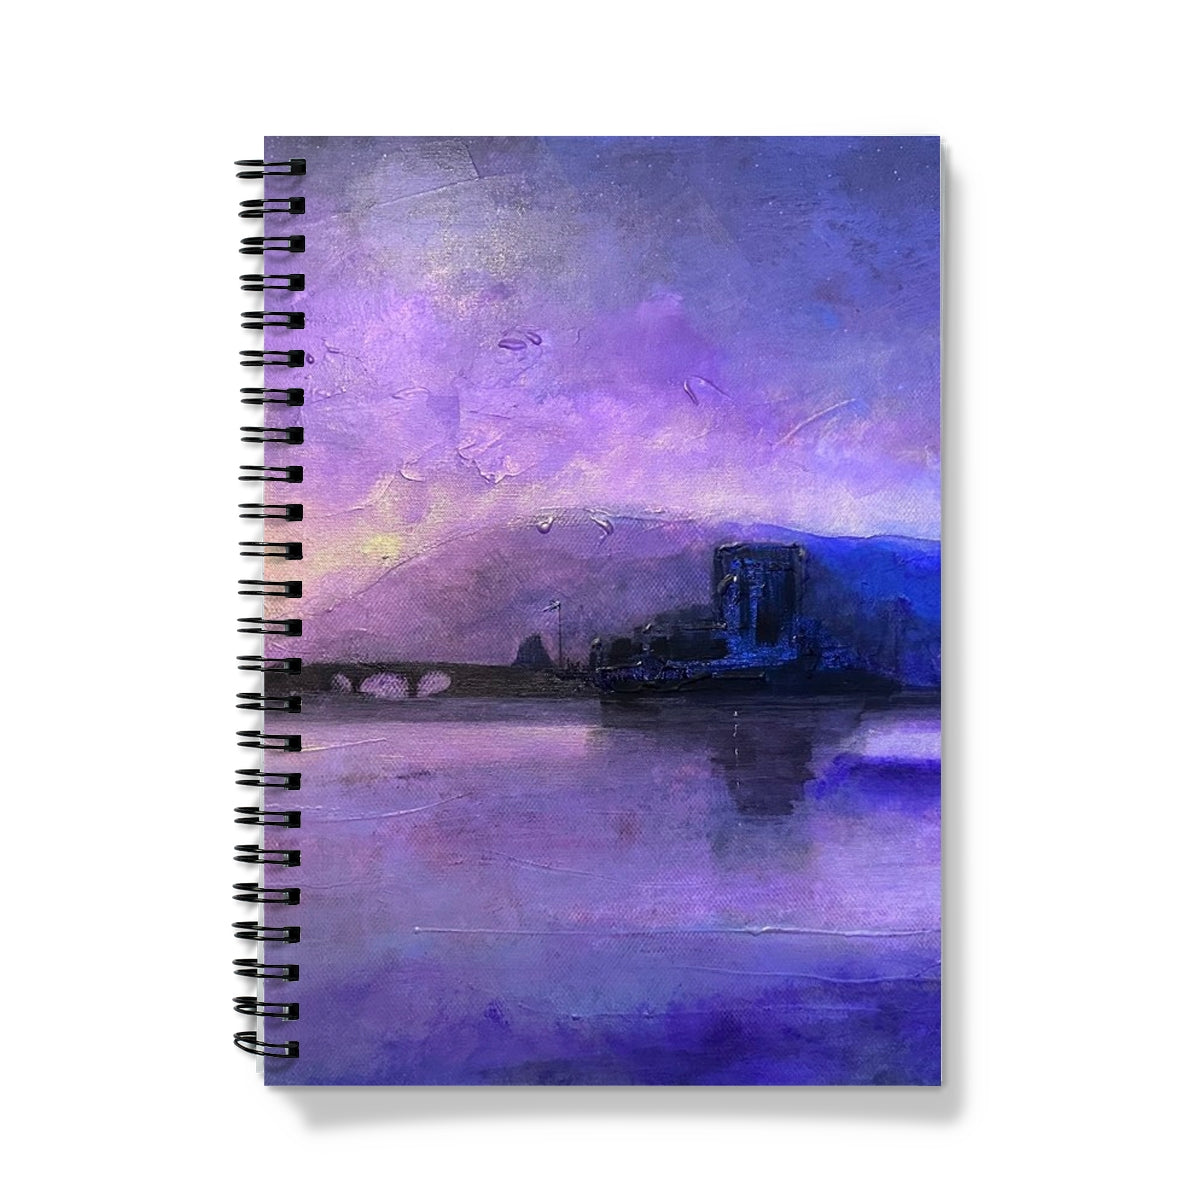 Eilean Donan Castle Moonset Art Gifts Notebook-Journals & Notebooks-Historic & Iconic Scotland Art Gallery-A4-Lined-Paintings, Prints, Homeware, Art Gifts From Scotland By Scottish Artist Kevin Hunter